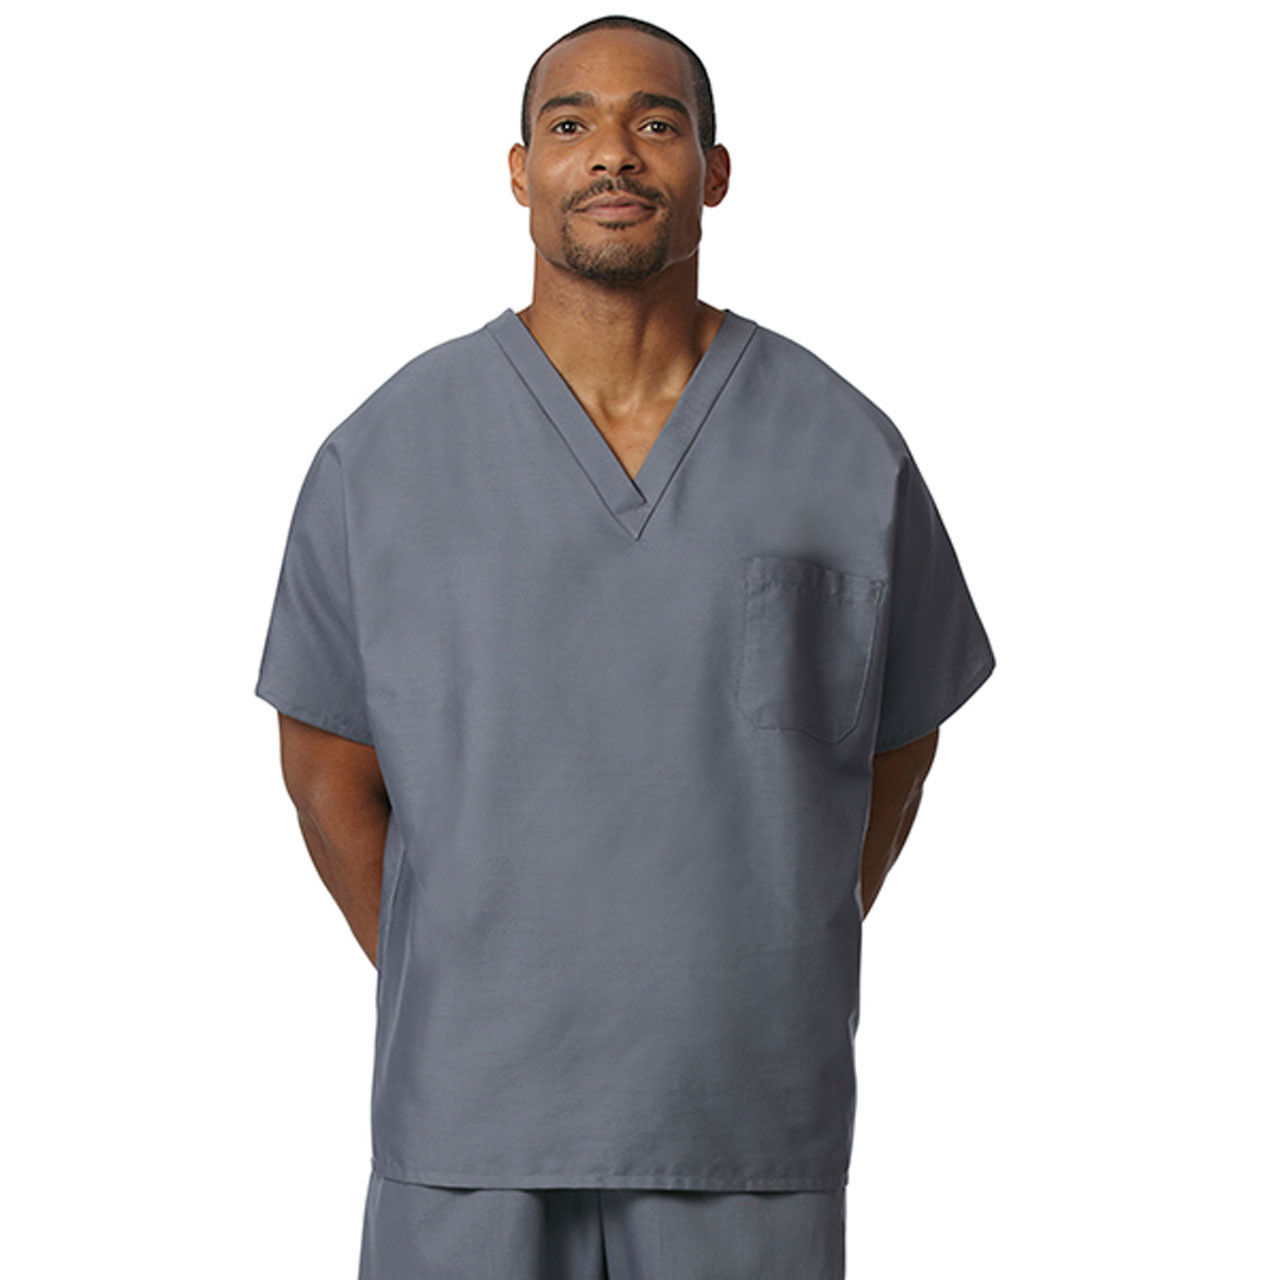 What is the neckline style of the Womens and Mens Tall Scrub Tops?